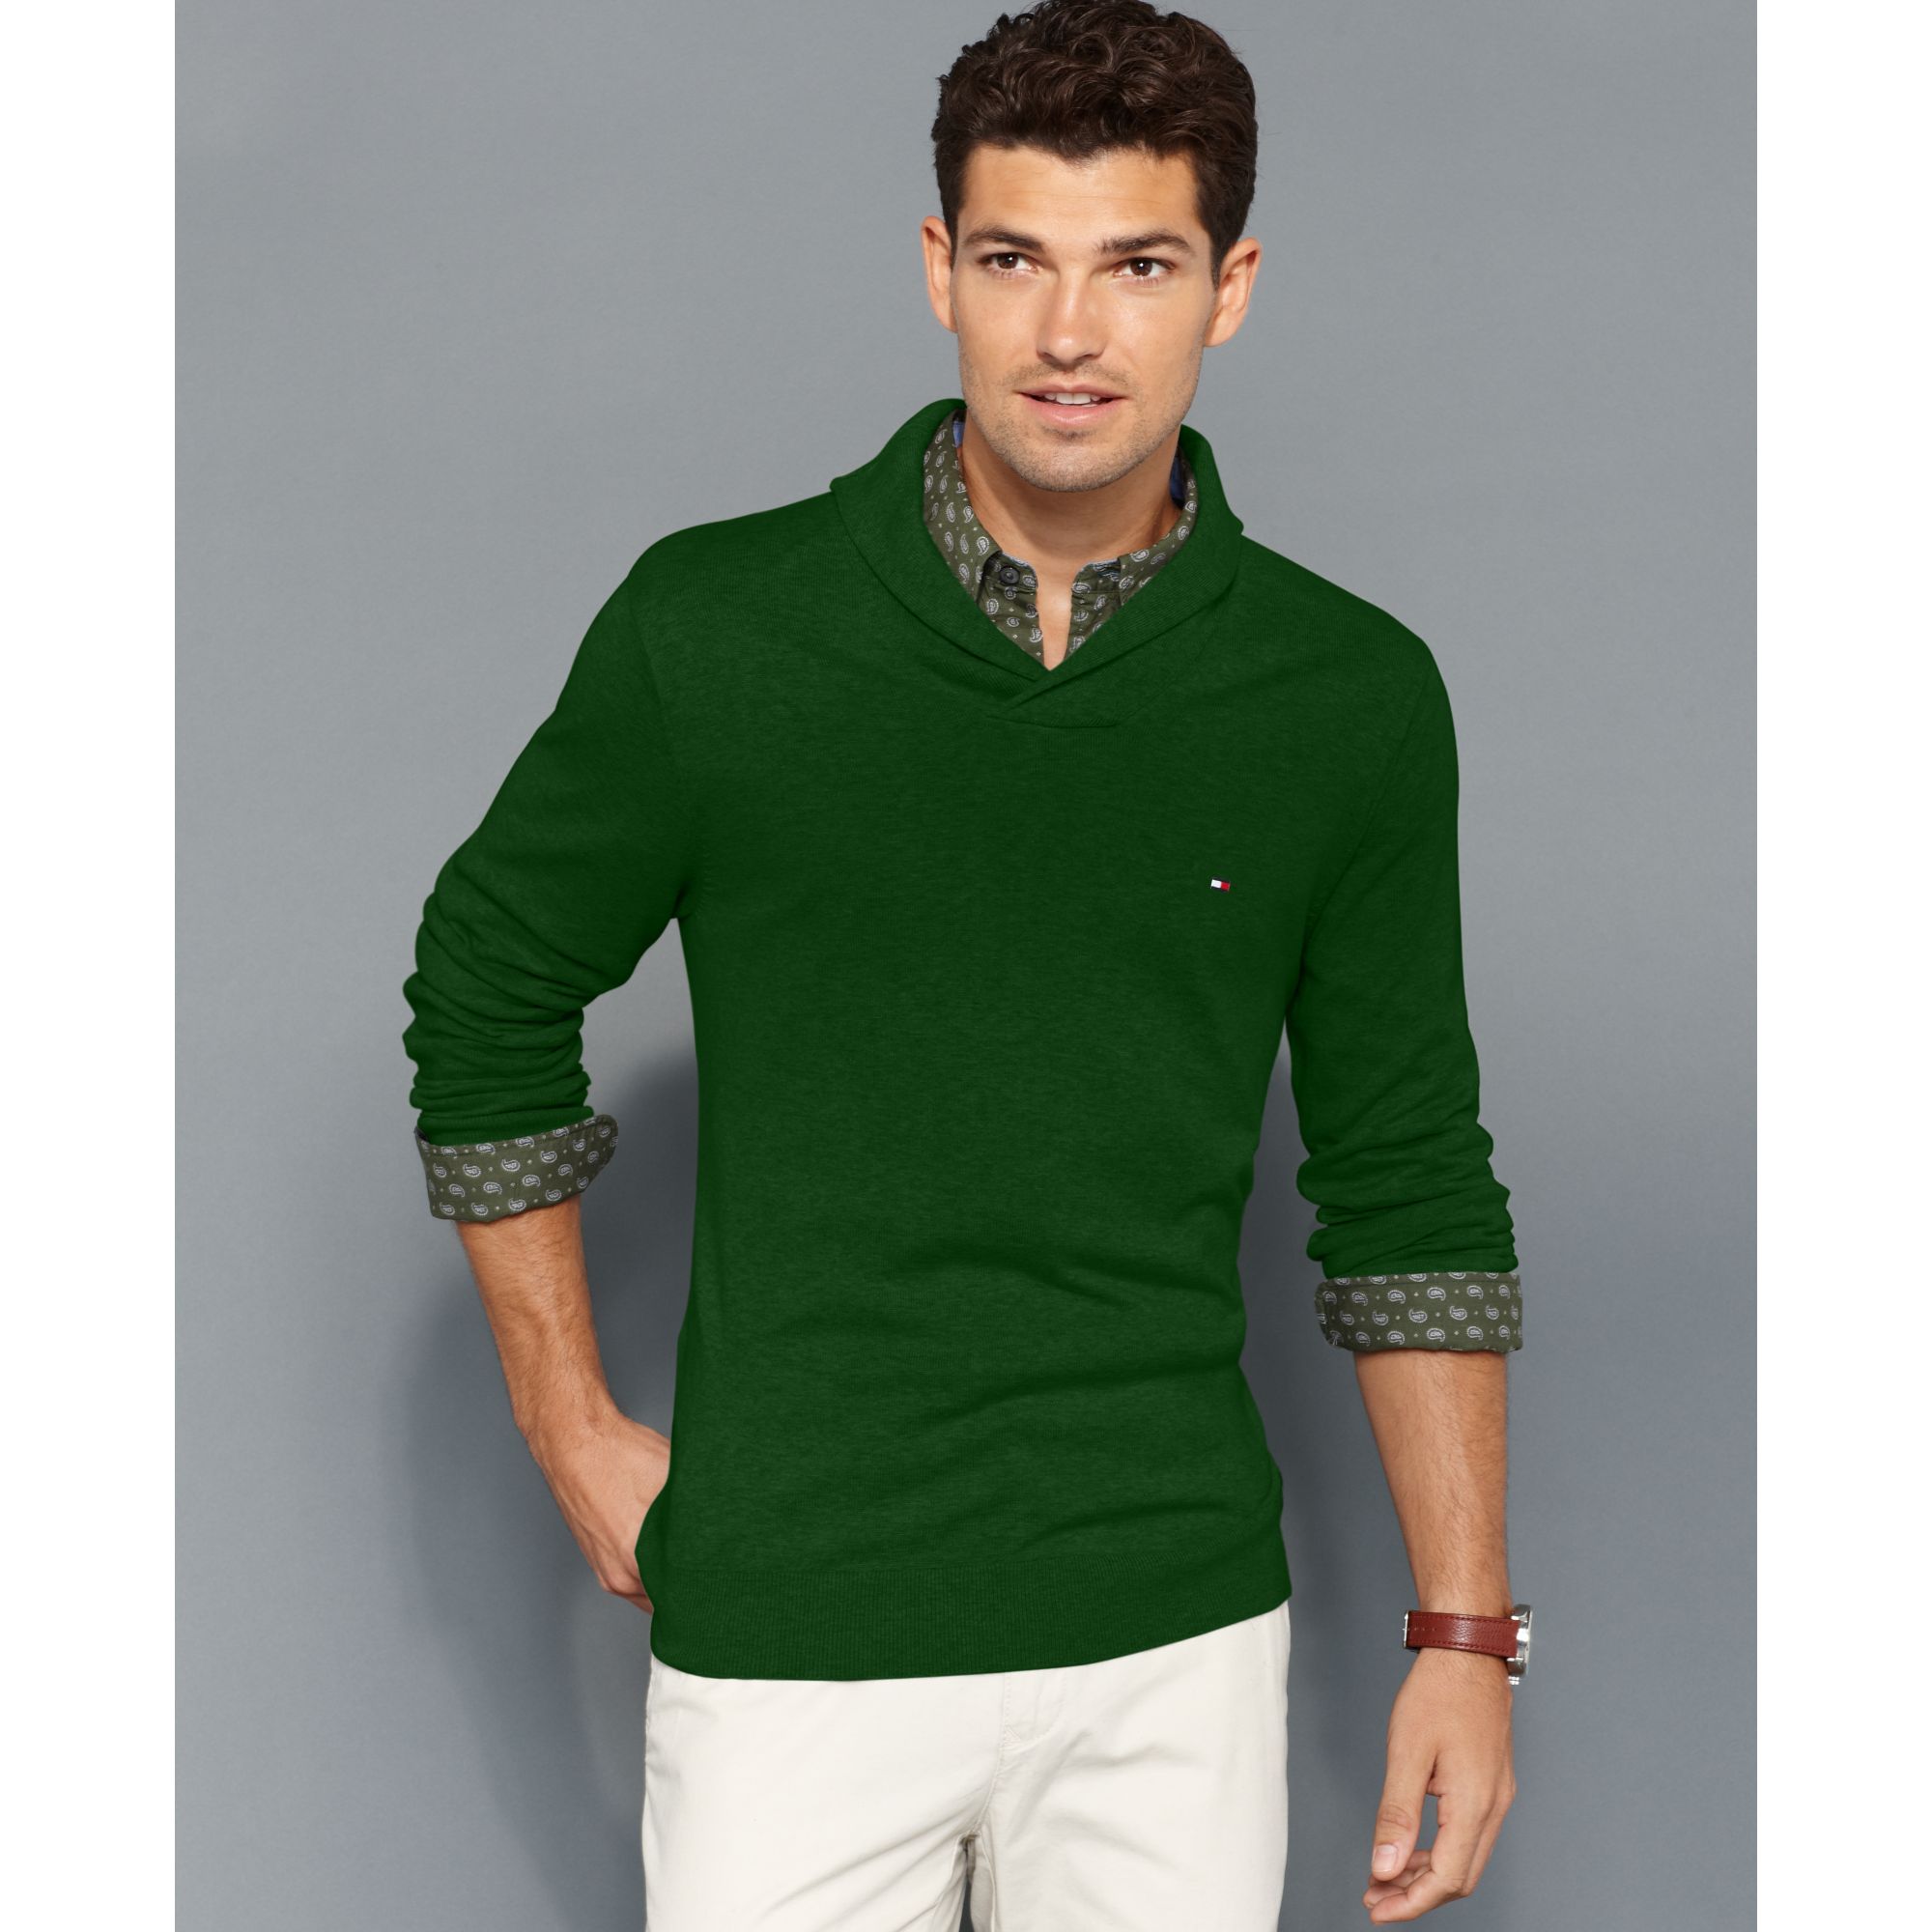 Lyst - Tommy hilfiger American Shawl Collar Sweater in Green for Men